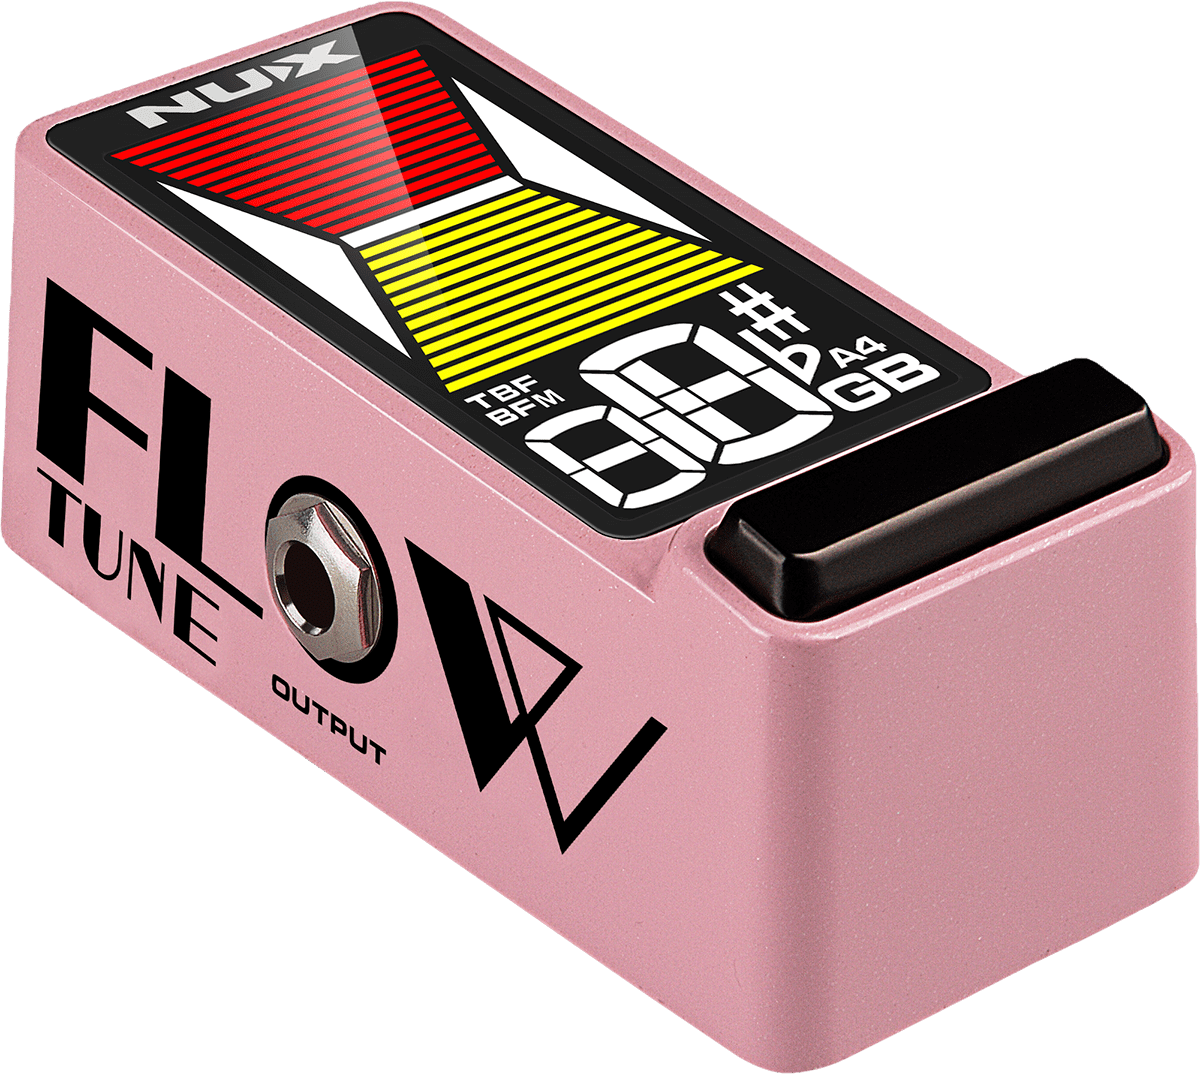 FLOWTUNE2-PINK - Tune pedal